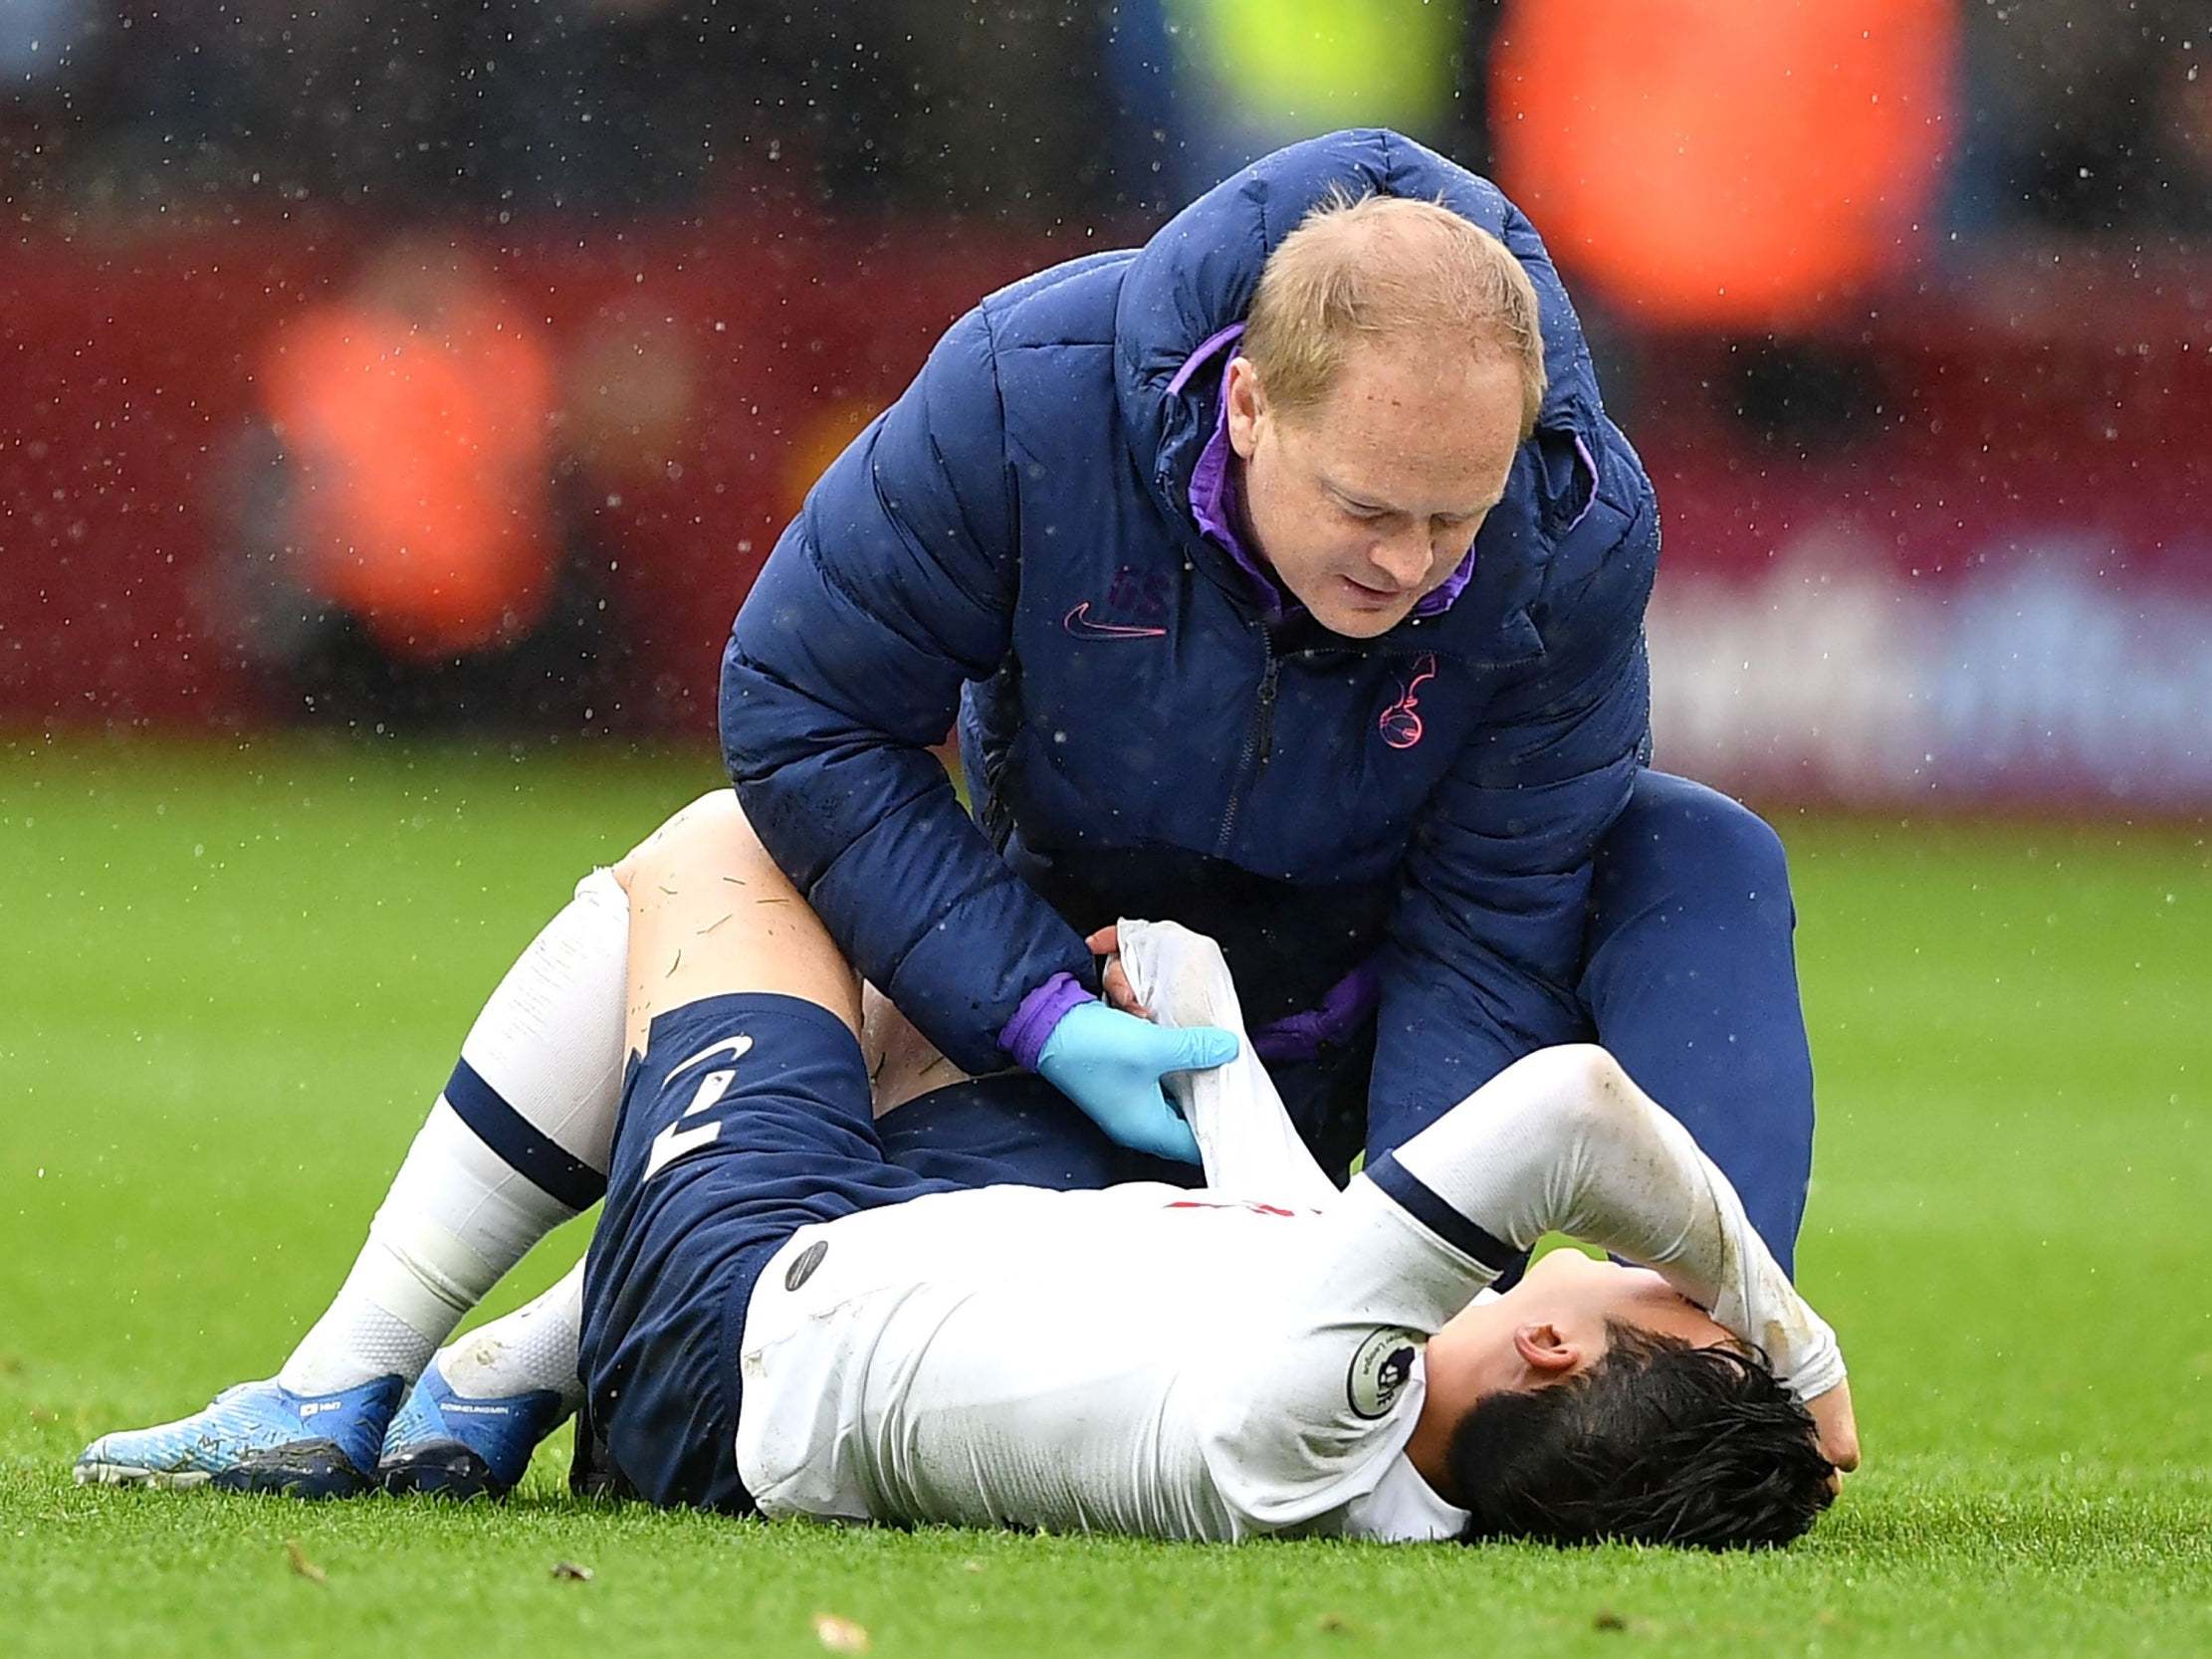 Son Heung-min suffered a fractured arm in Tottenham's 3-2 victory over Aston Villa